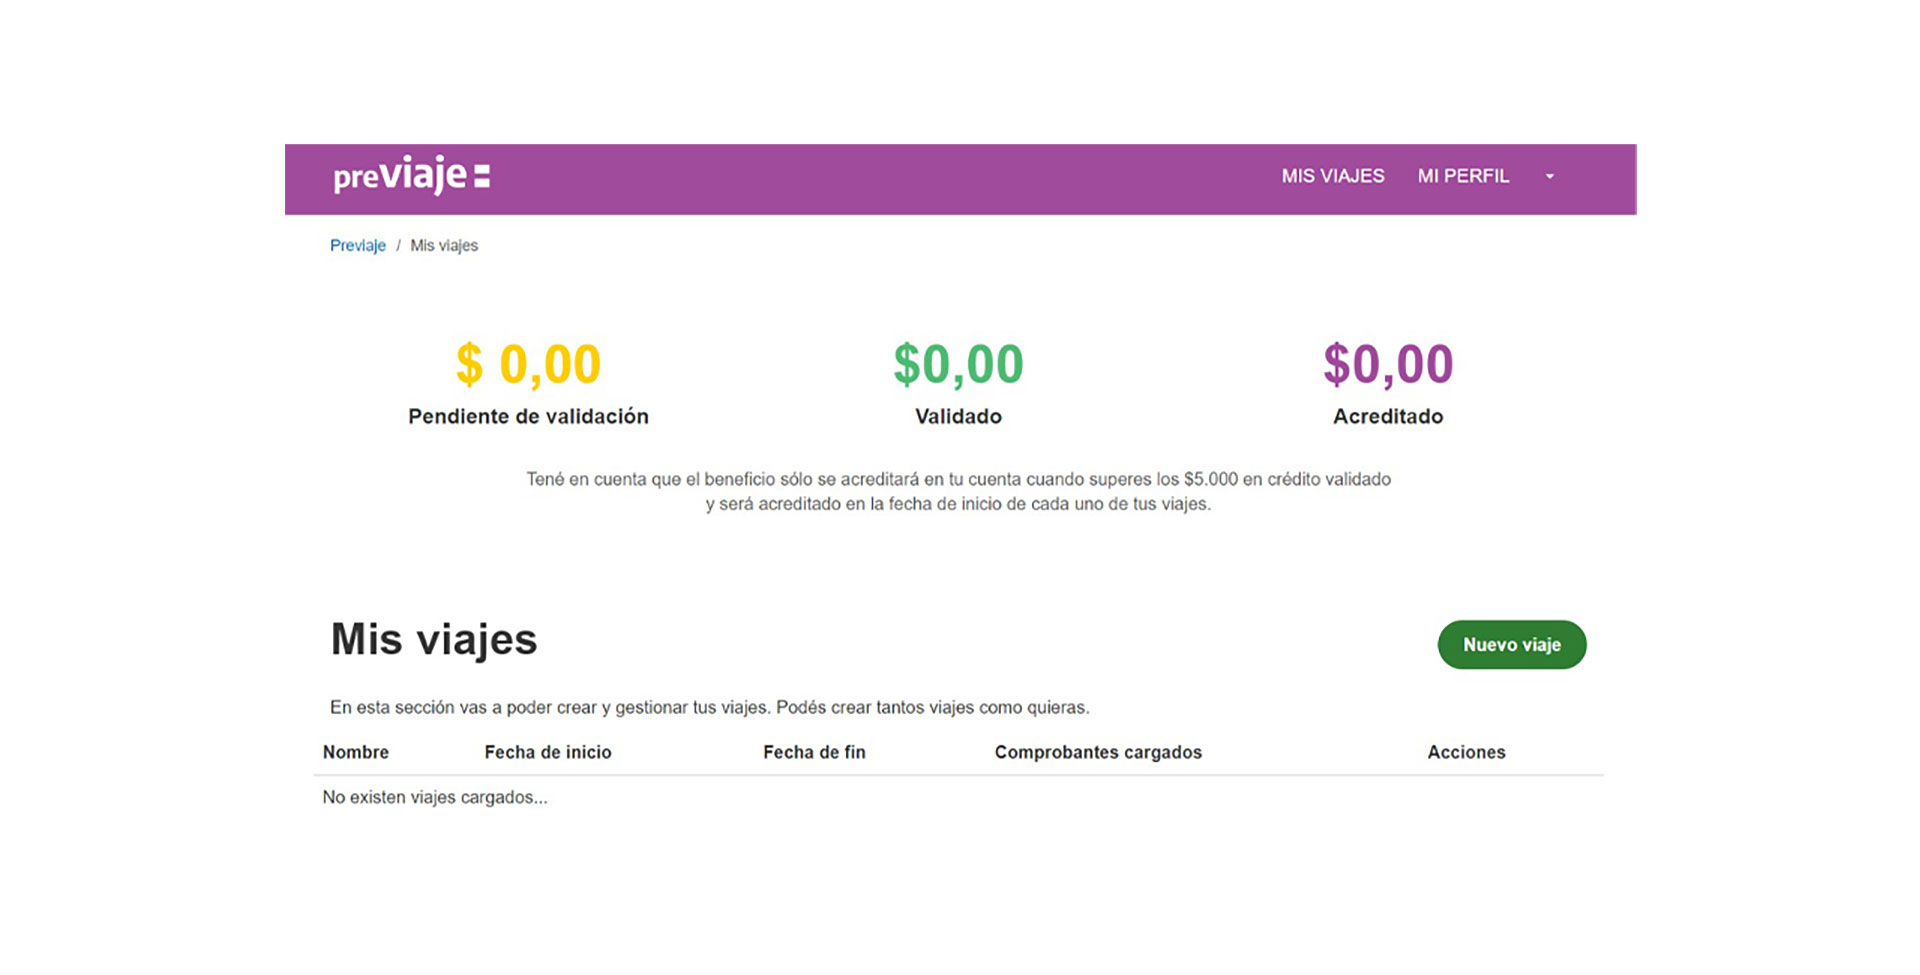 Image of the official site that allows the start of the process to enter the receipts and obtain credit for the partial reimbursement of travel expenses